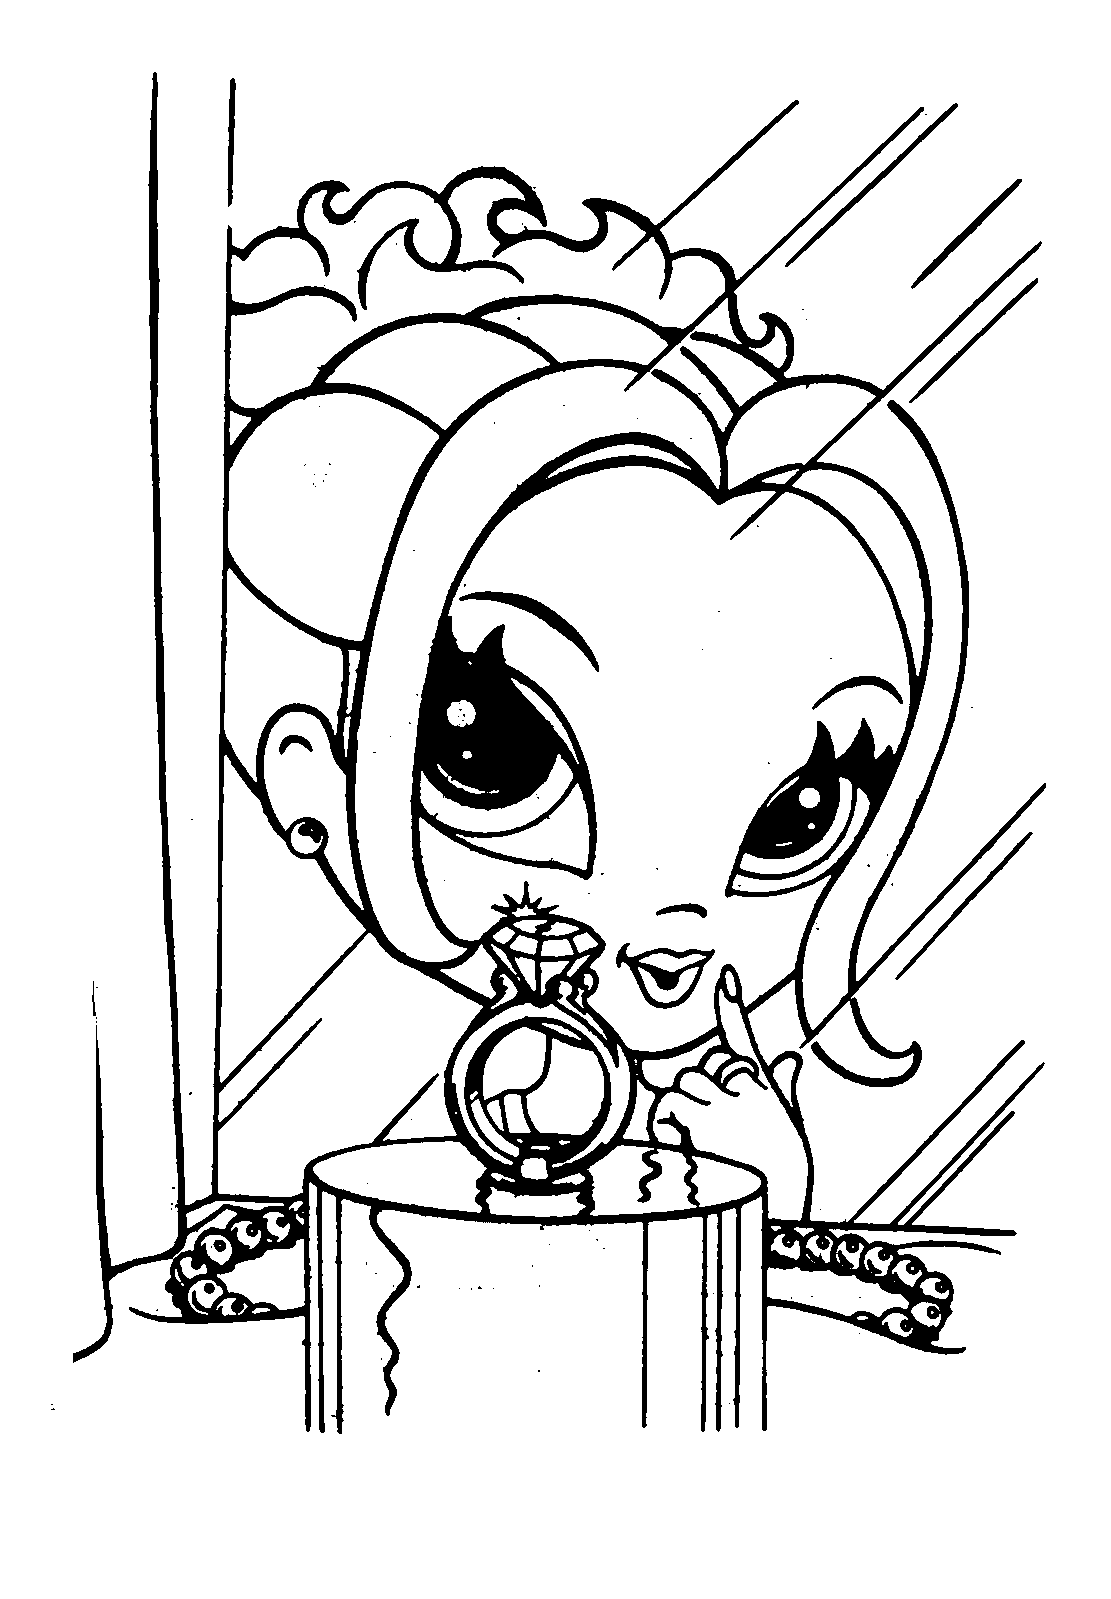 lisa frank coloring pages diamond ring Coloring4free - Coloring4Free.com